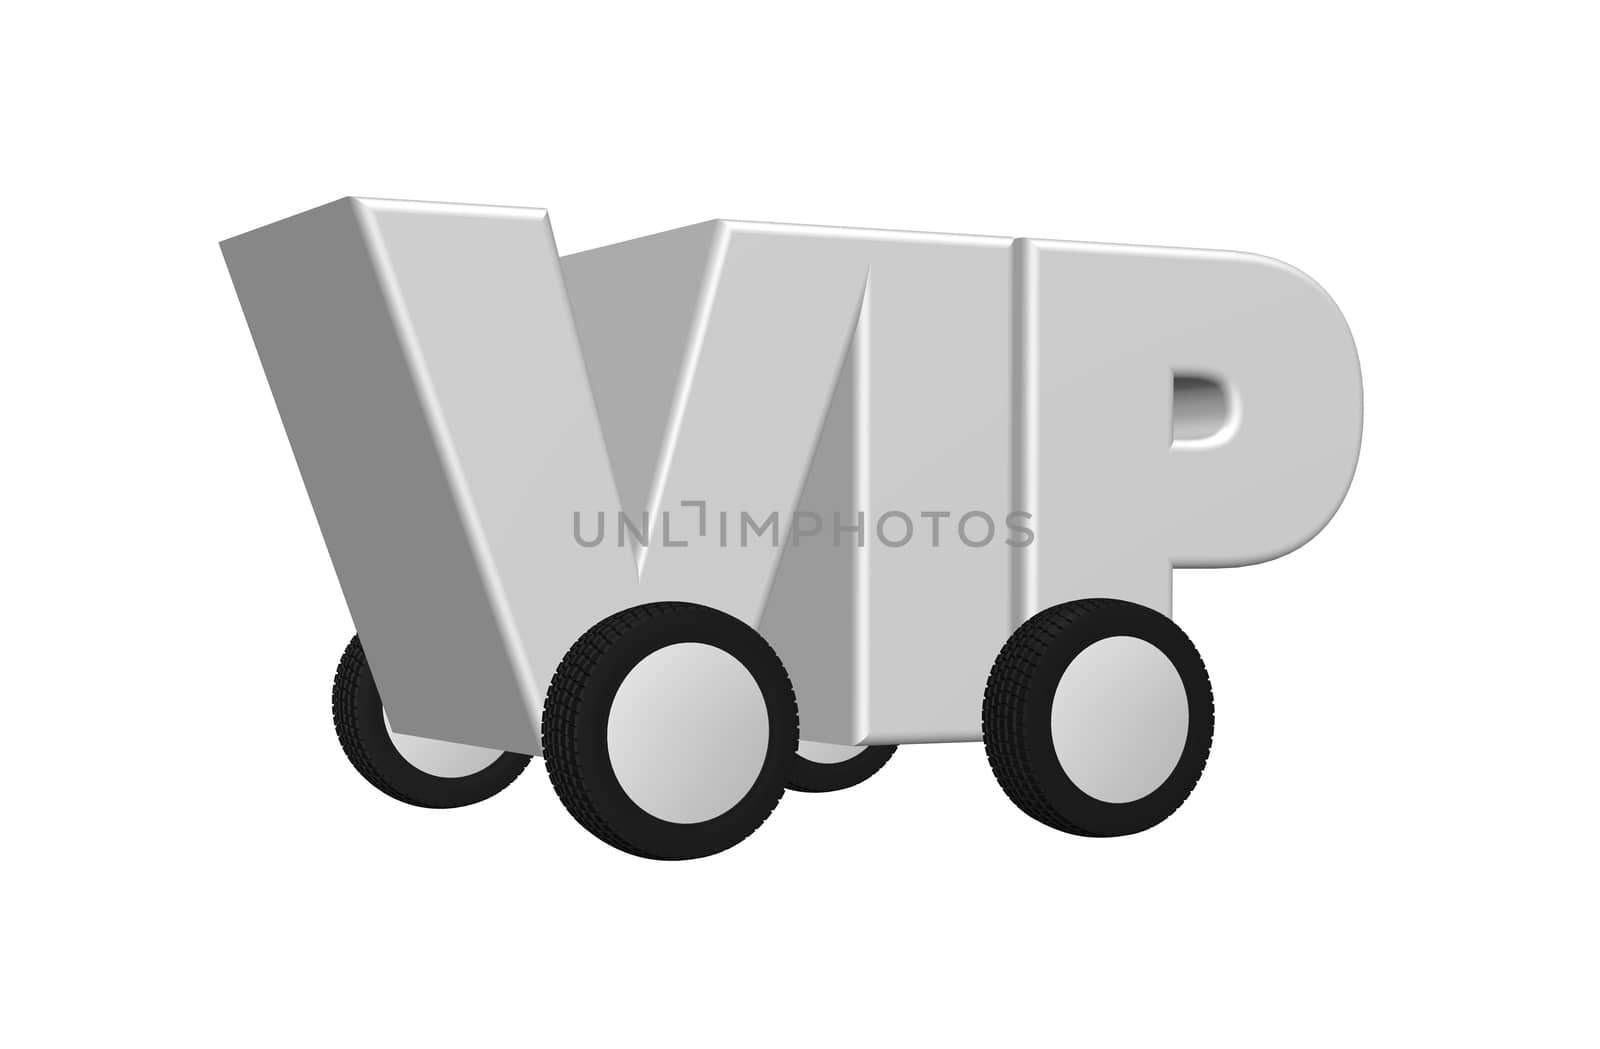 vip on wheels by drizzd